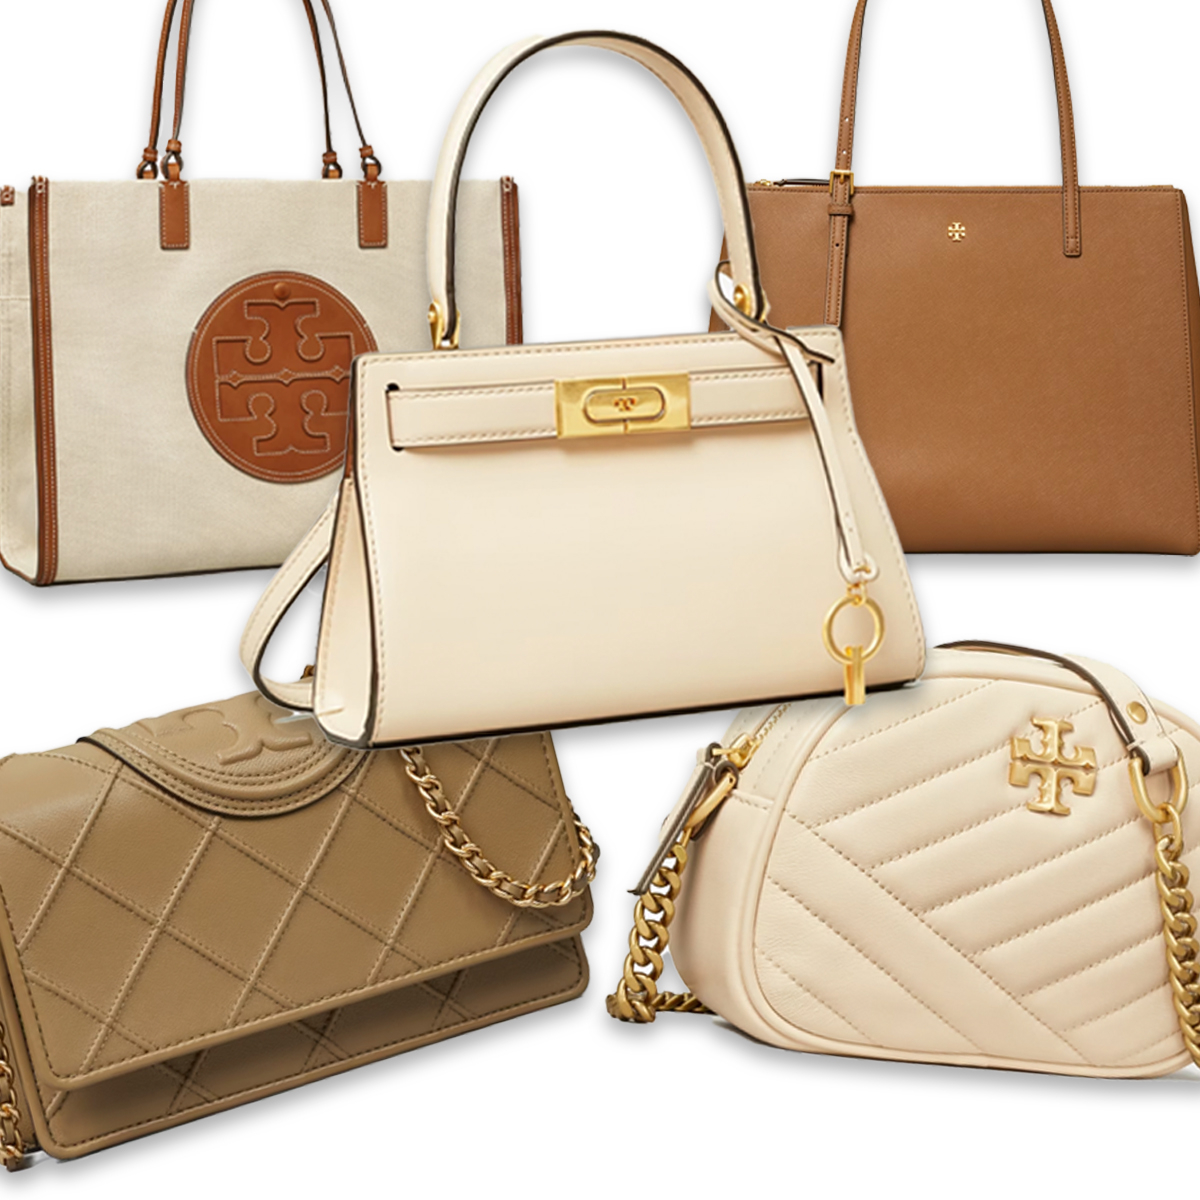 Tory Burch's Seasonal Sale Added Hundreds of New Bags & Shoes